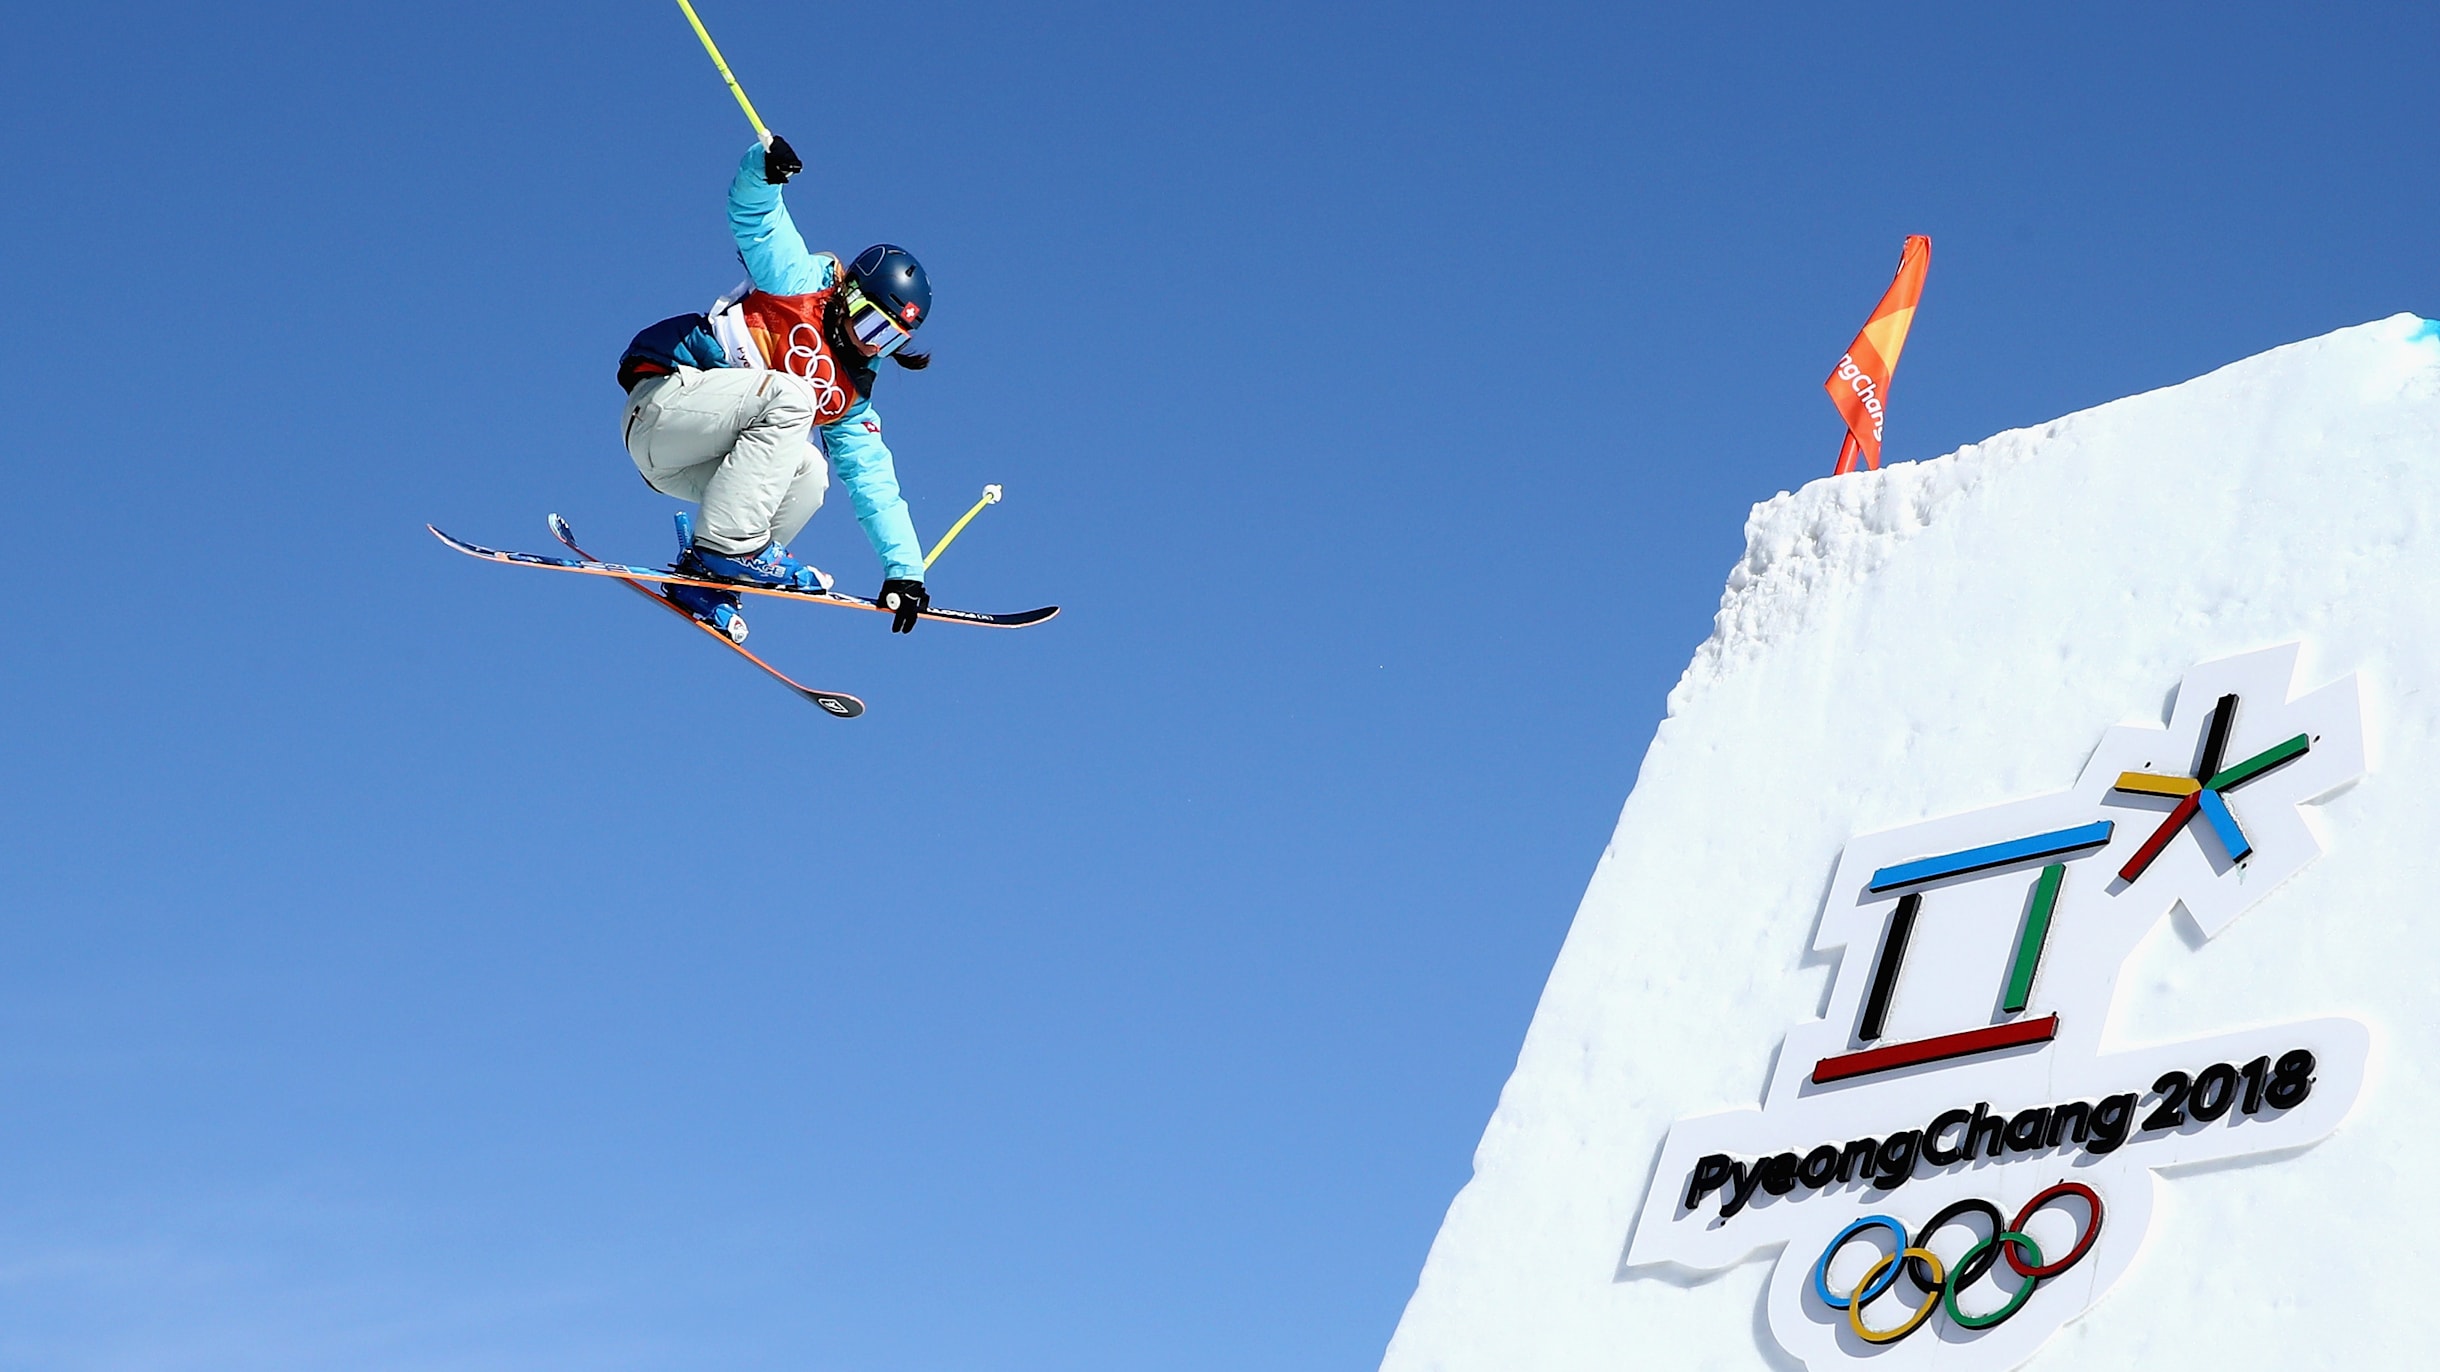 Whats the difference between the snowboard and ski freestyle events at Beijing 2022?